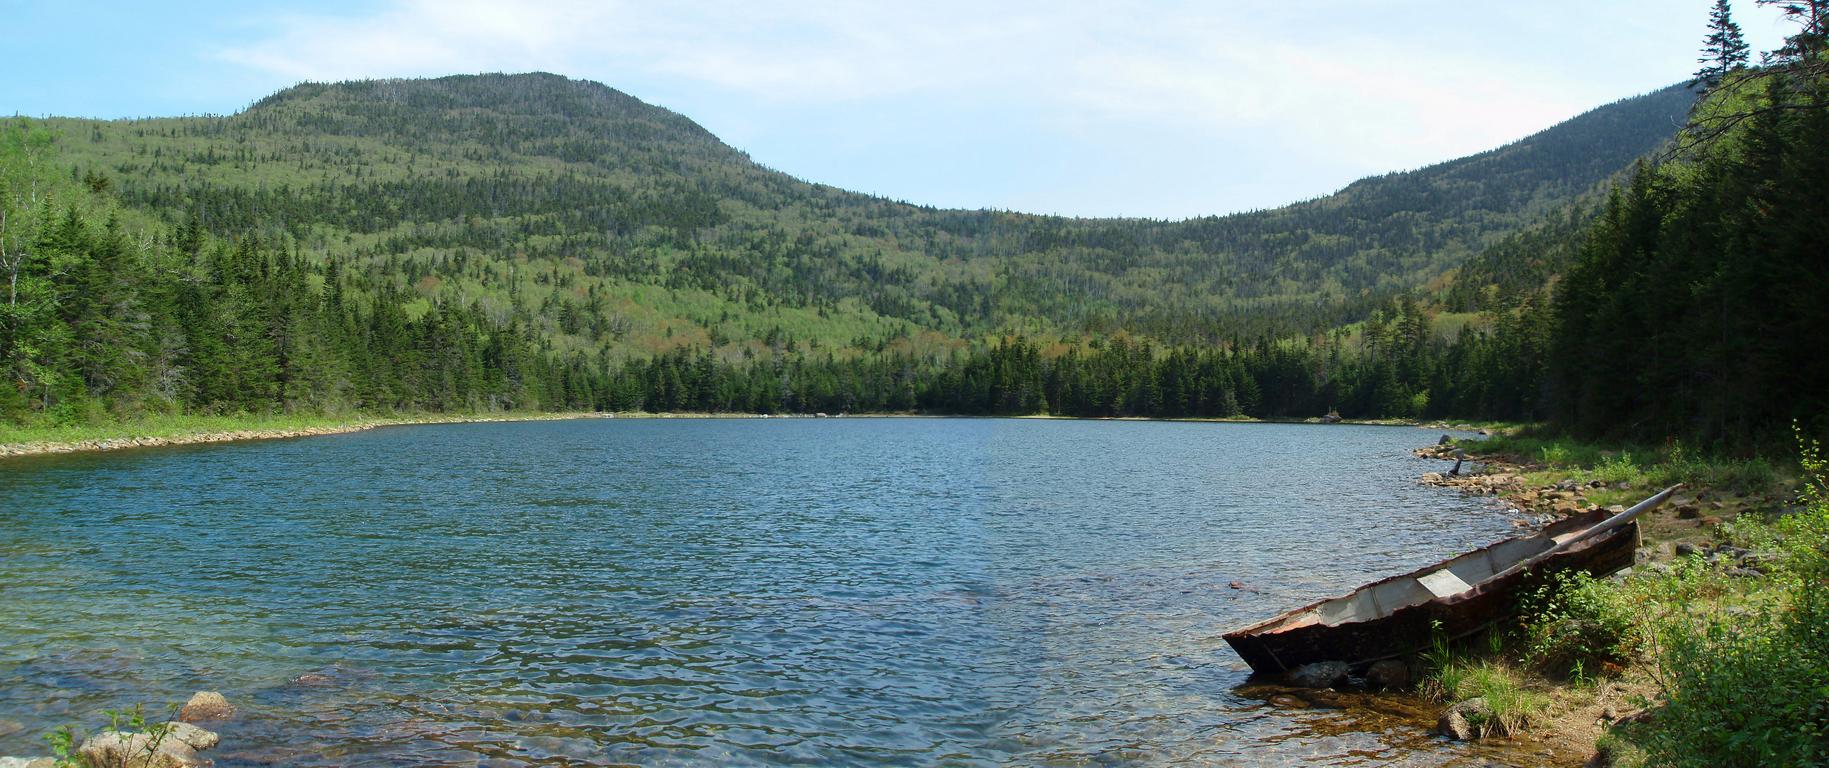 panoramic view of East Pond in May on the way to East Scar Ridge in the White Mountains of New Hampshire